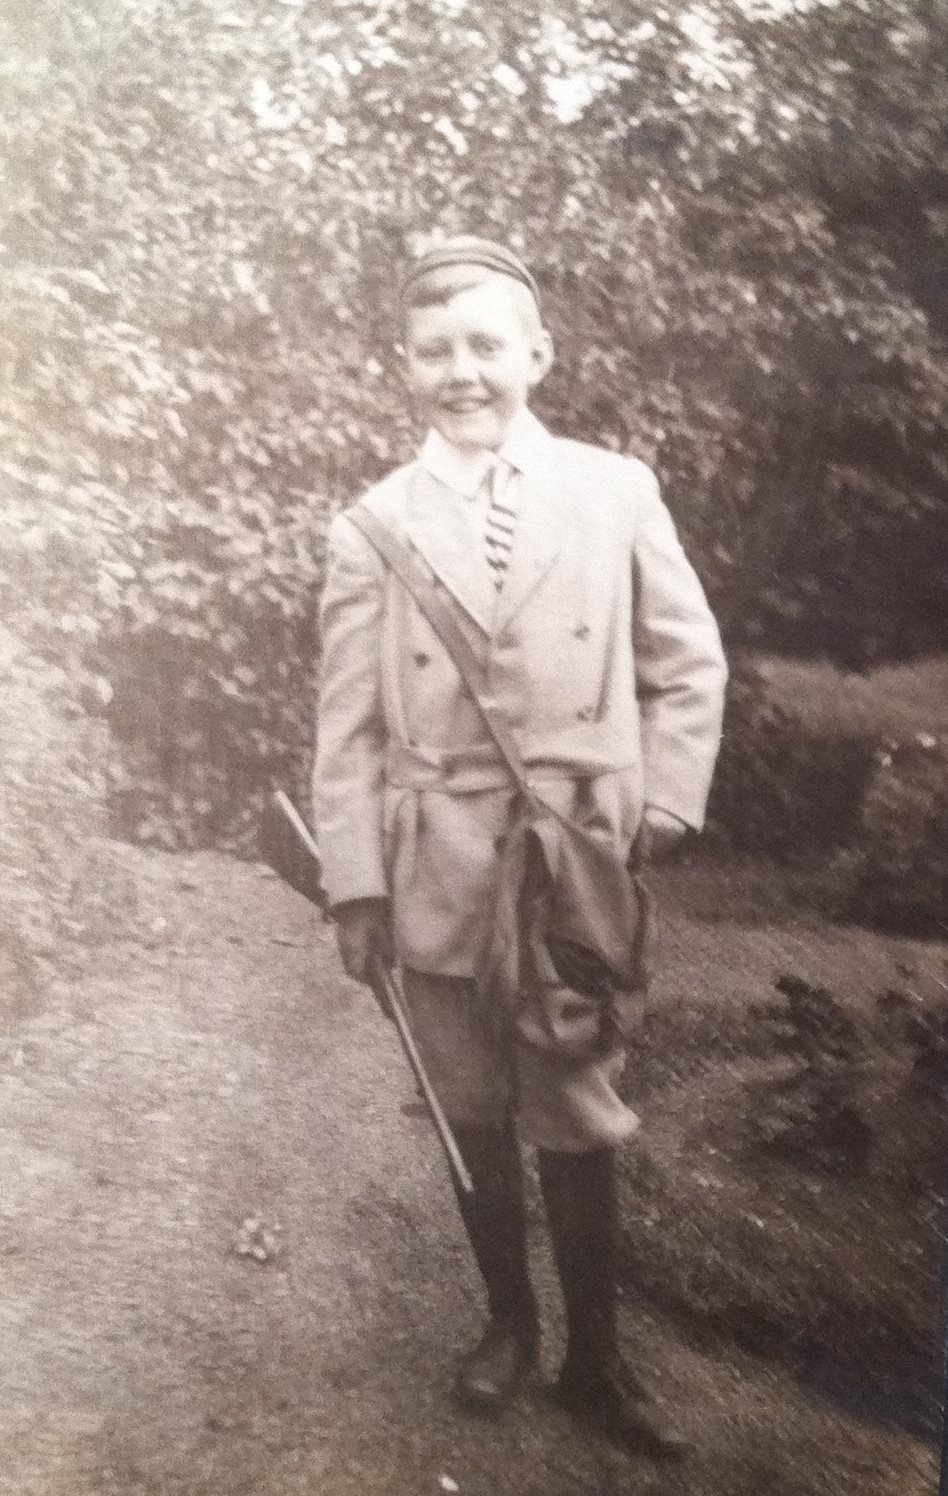 A boy in stylish hunting attire posing proudly, rifle in hand.